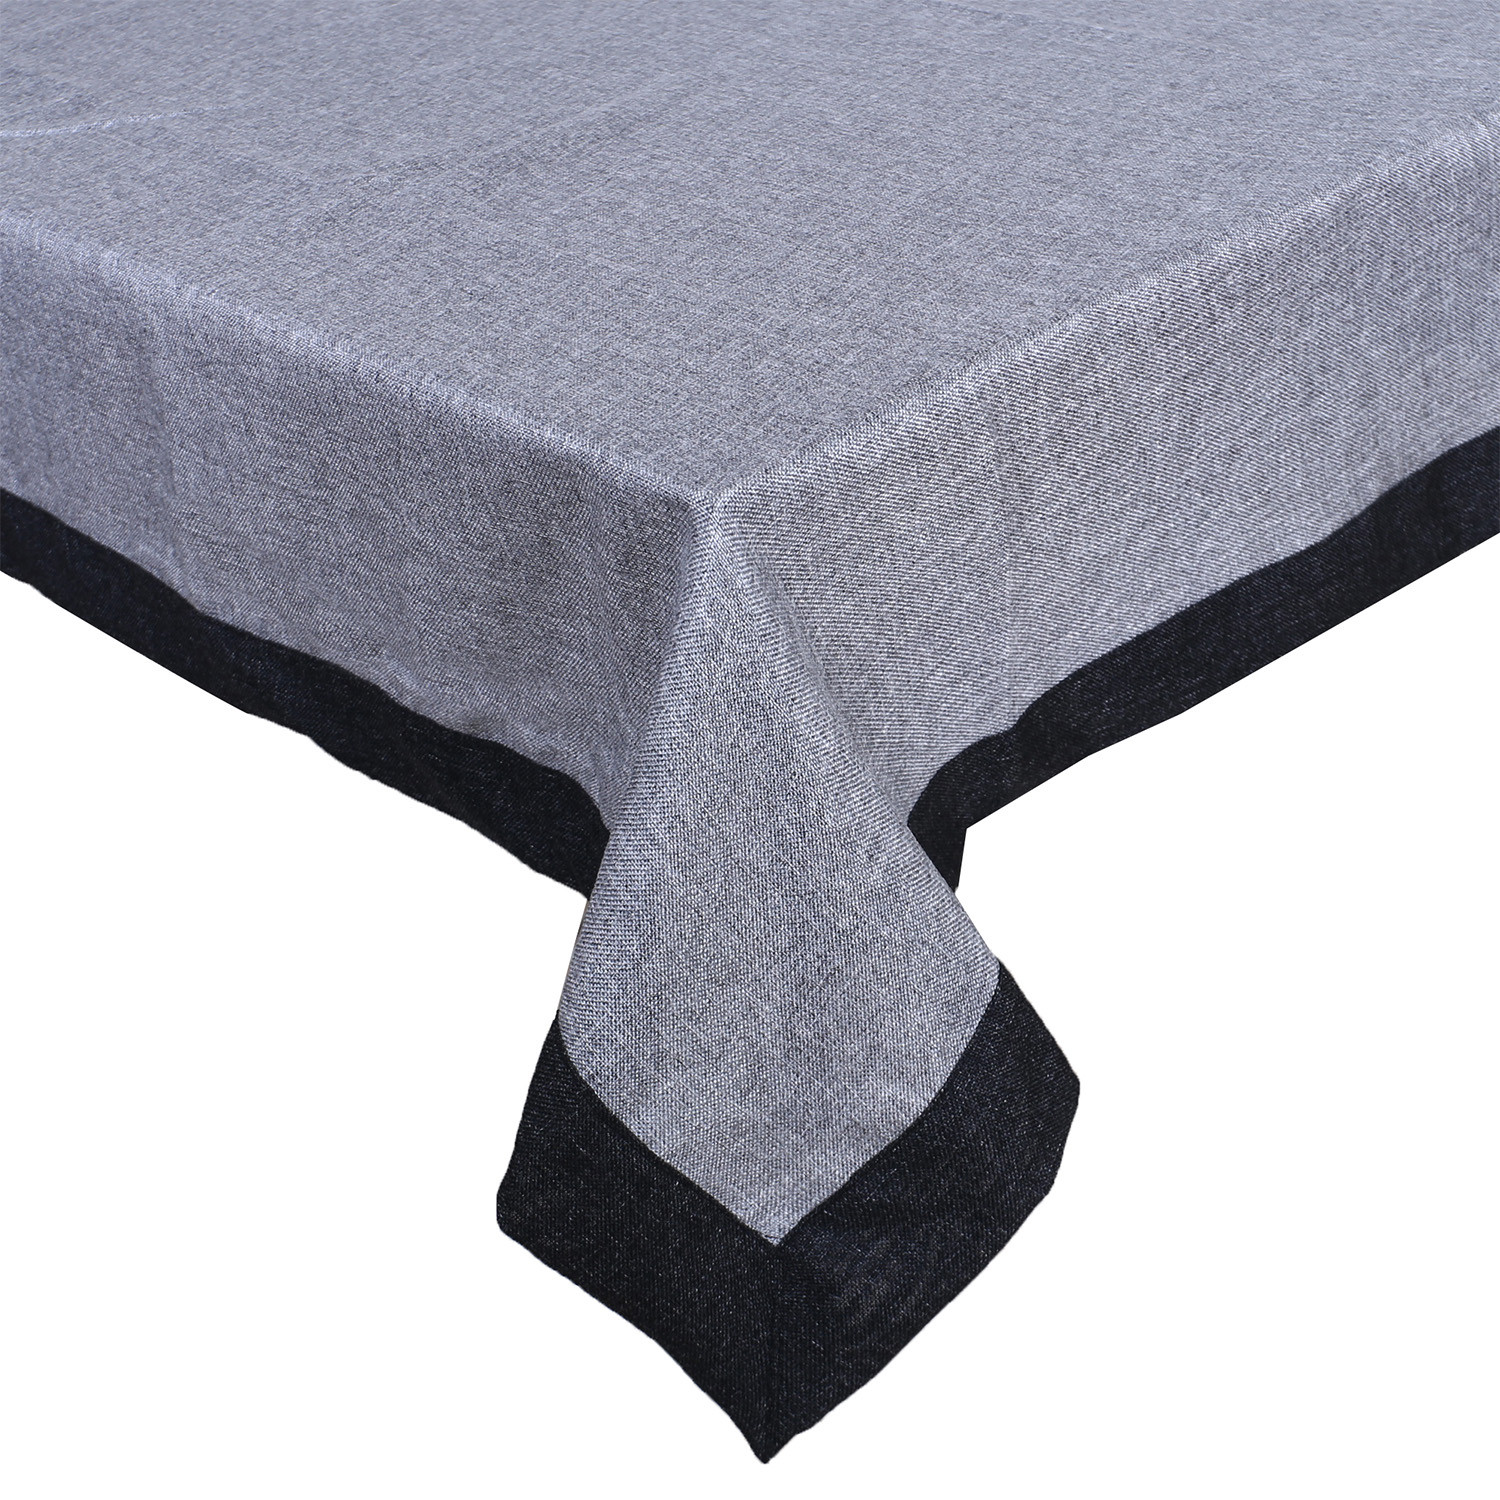 Kuber Industries Dining Table Cover|Jute Spill Proof Tablecloth|Kitchen Dinning Protector With Jutelace Border, 60X90 Inch (Gray)